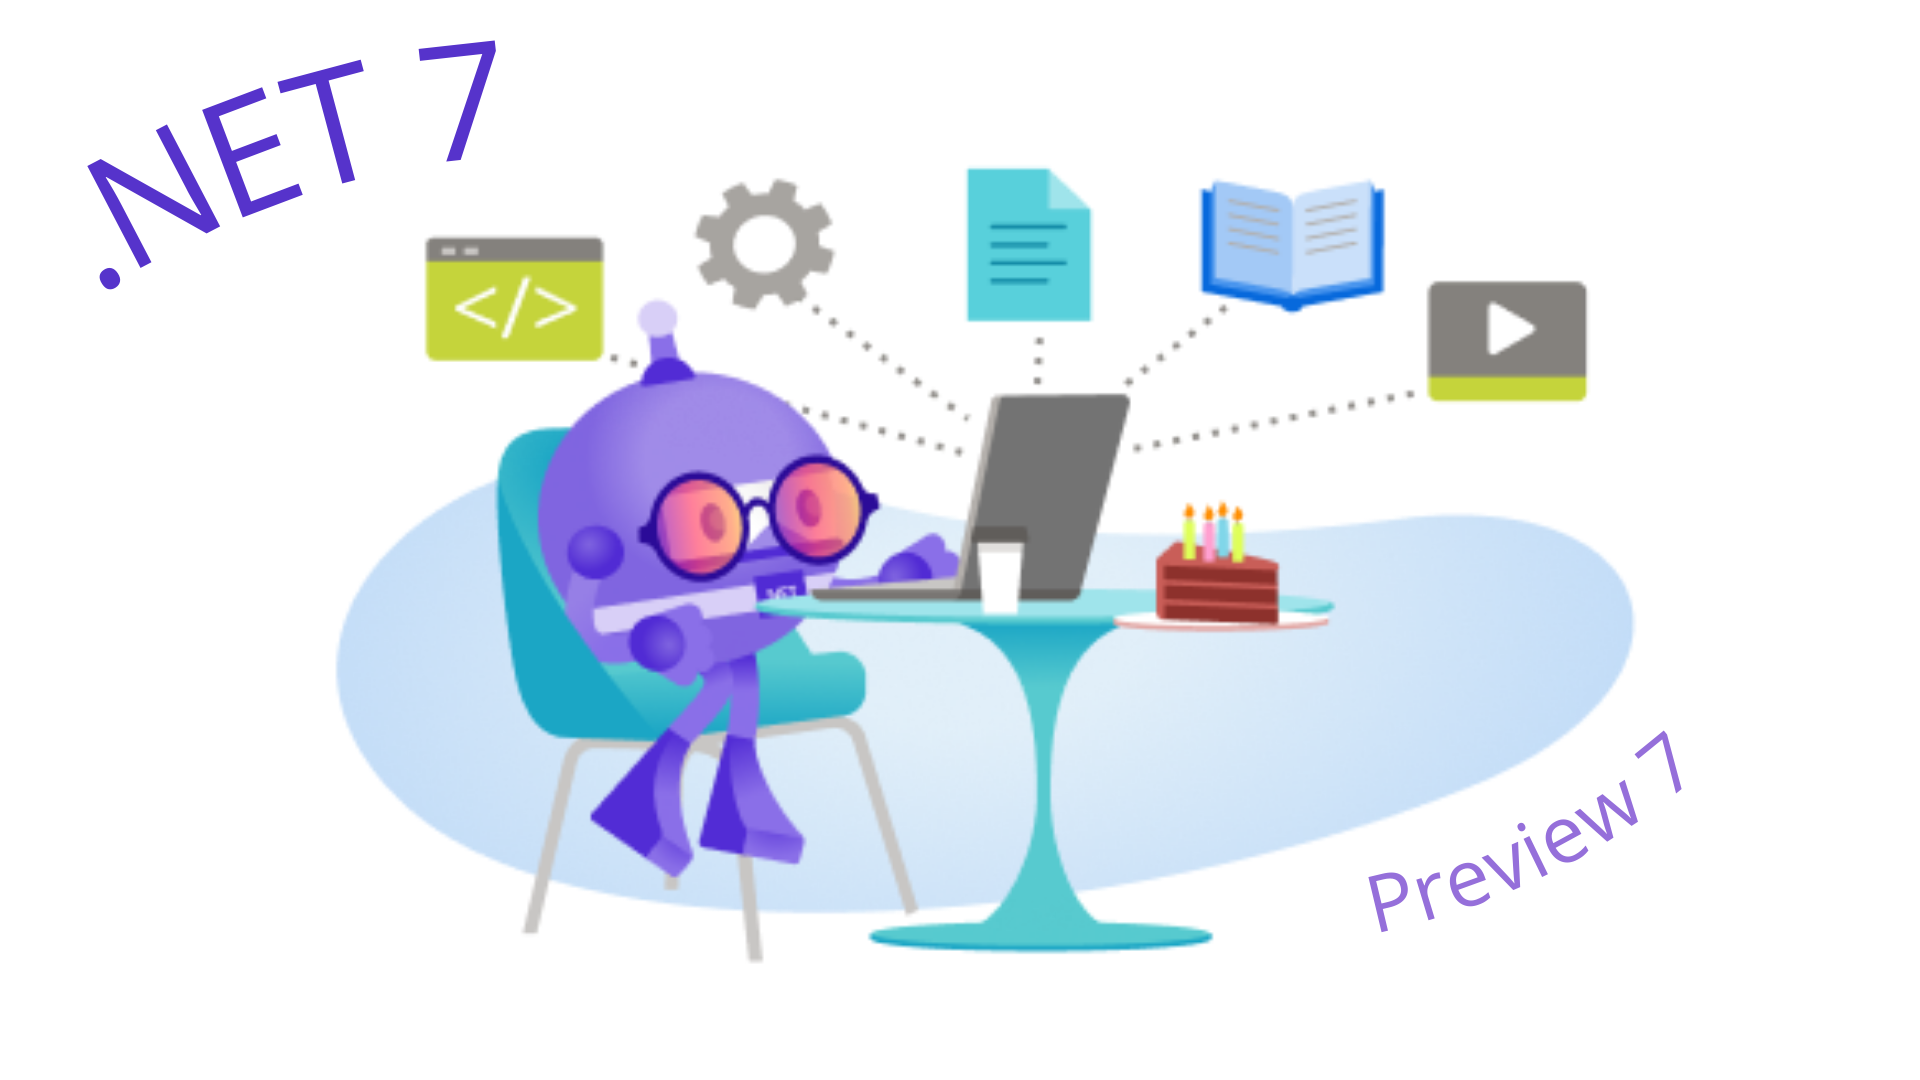 .NET 7 Preview 7 is now available with improvements to System.LINQ, Unix file permissions, low-level structs, p/Invoke source generation, code generation, and websockets.